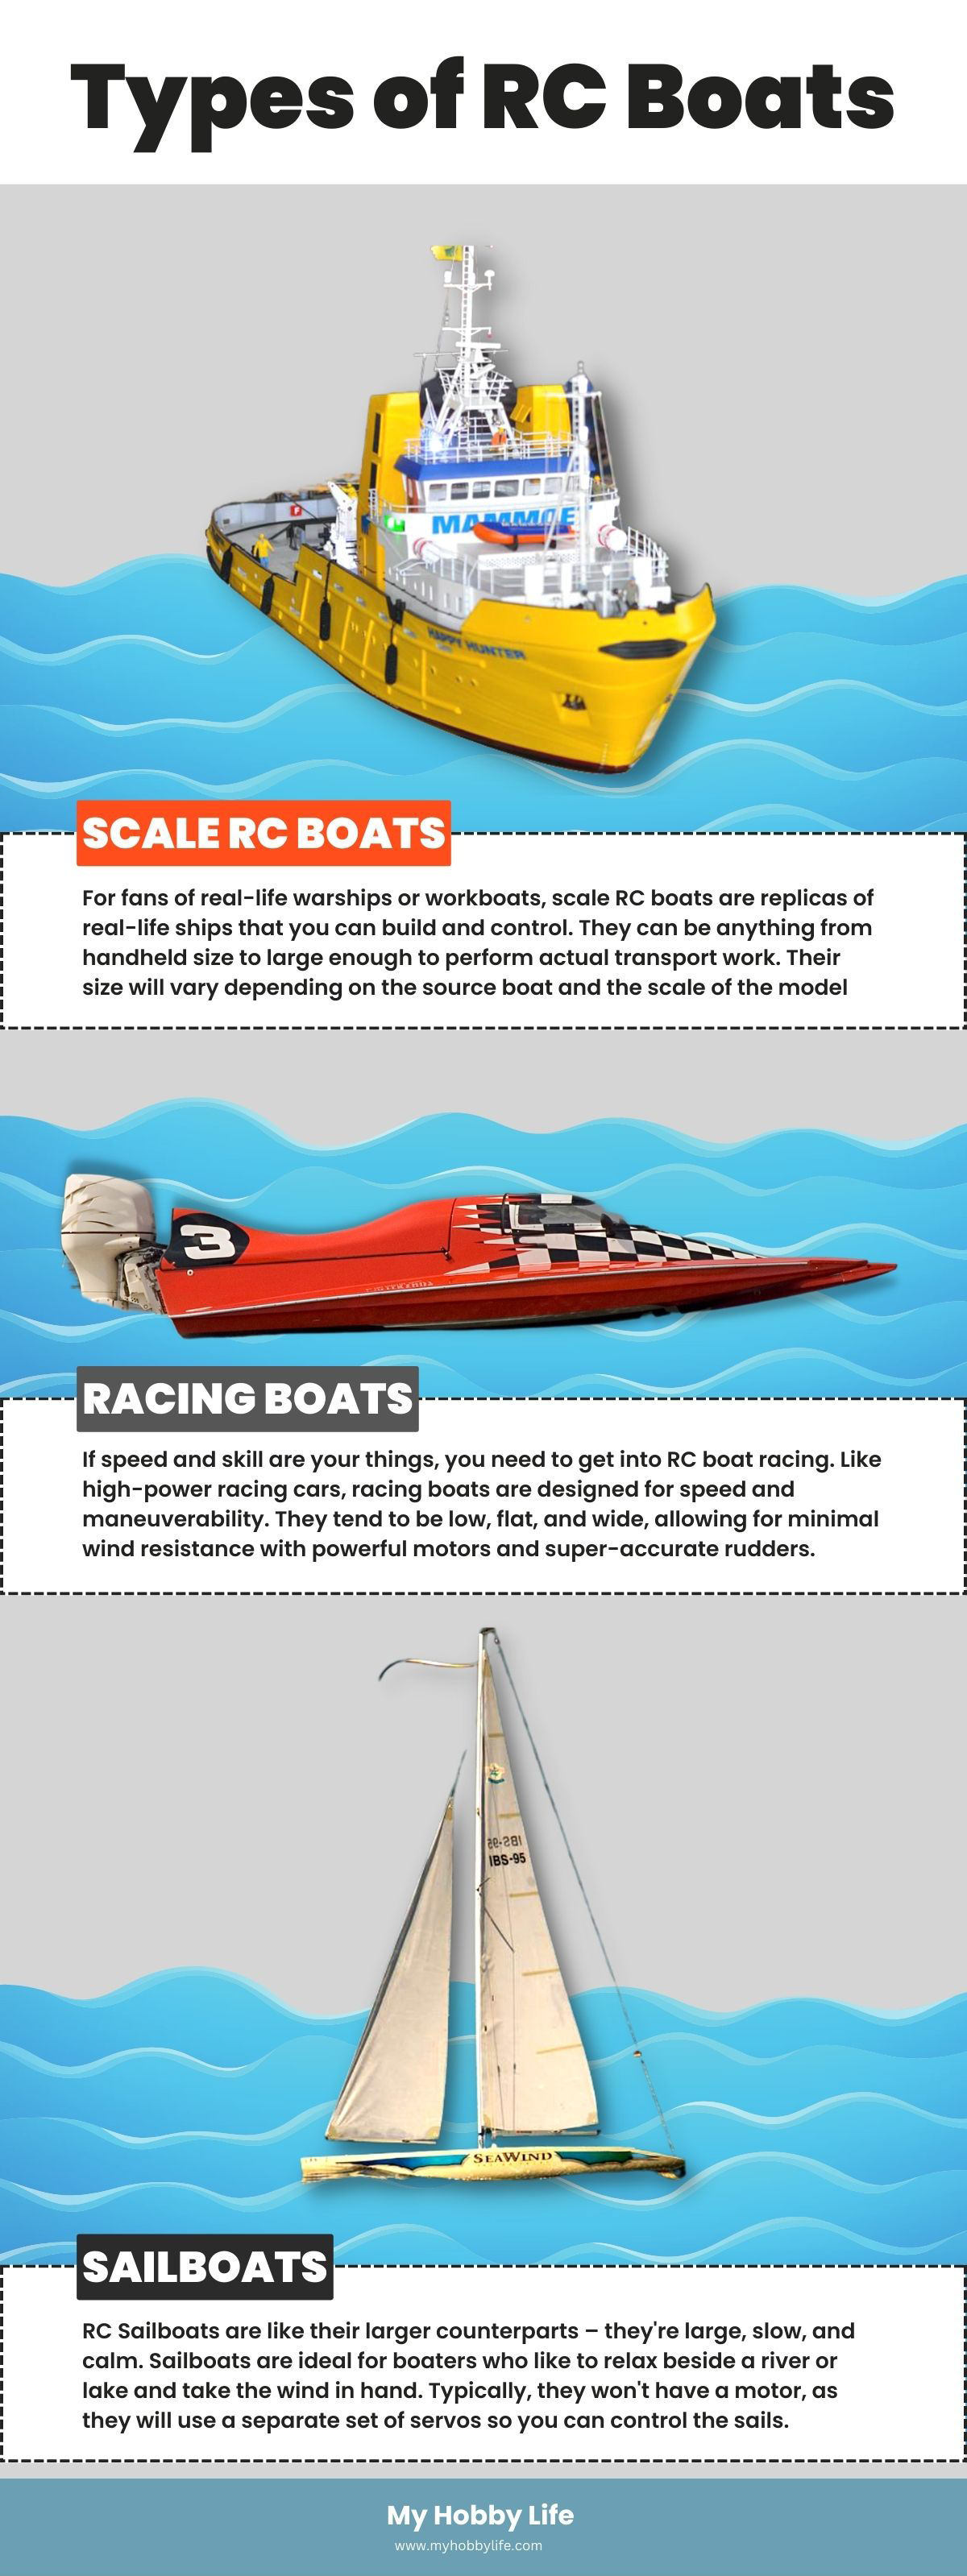 Types of RC Boats